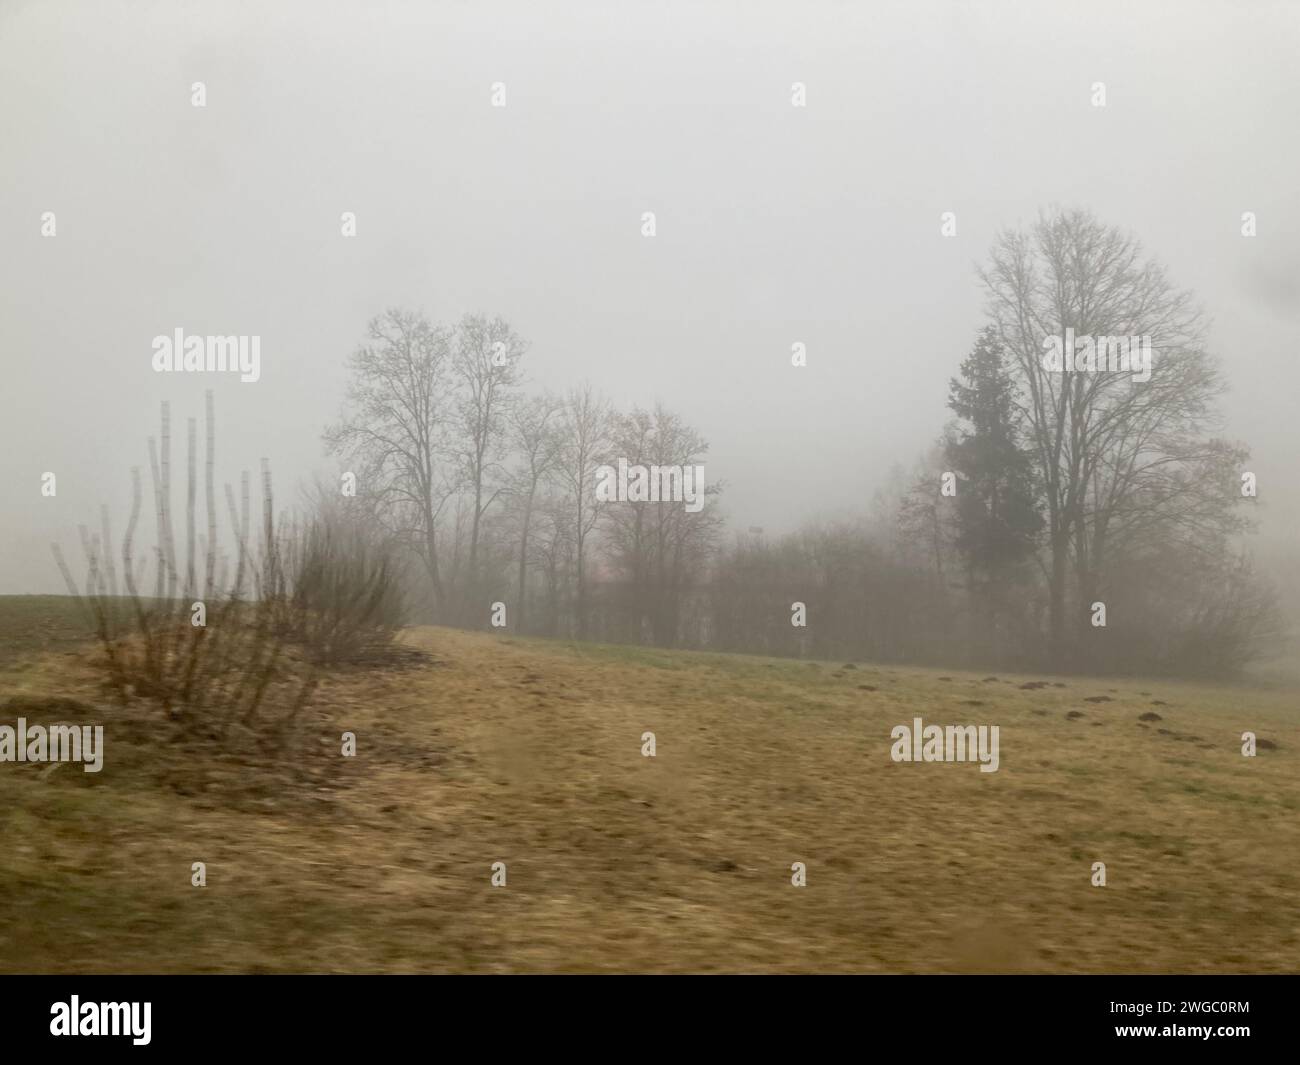 A misty fog envelops a field and trees on a dreary day Stock Photo